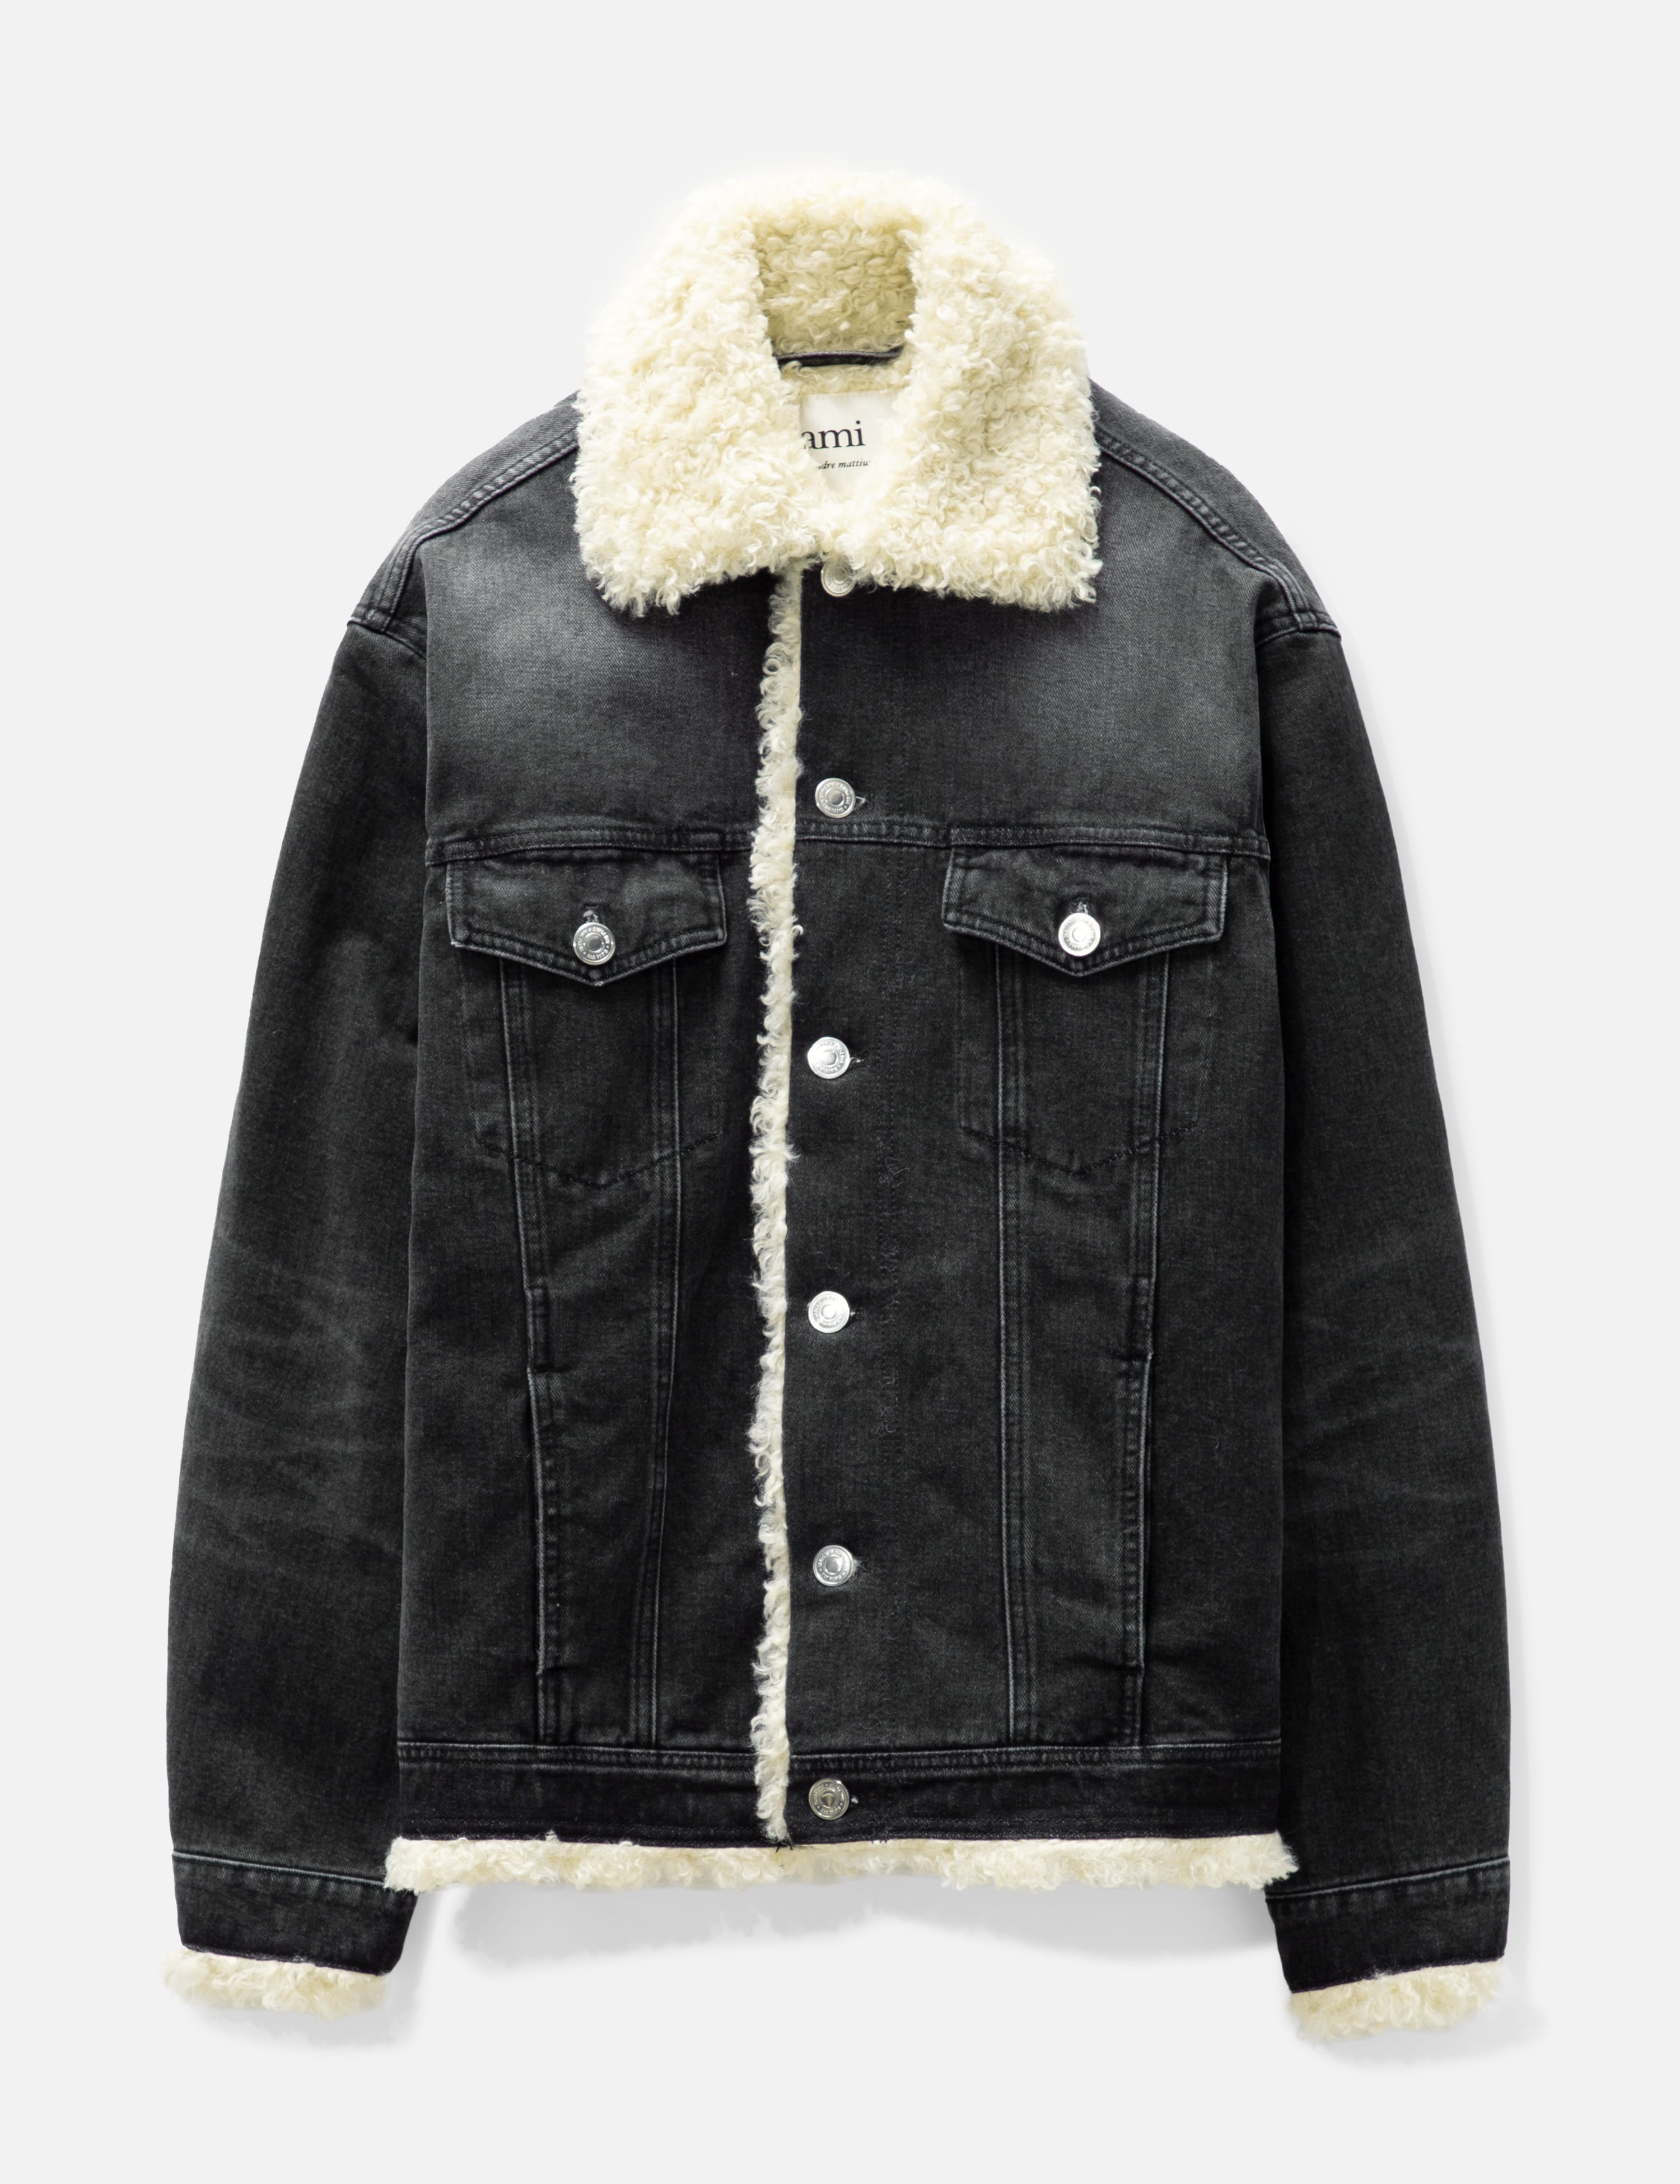 Ami - Trucker Jacket | HBX - Globally Curated Fashion and